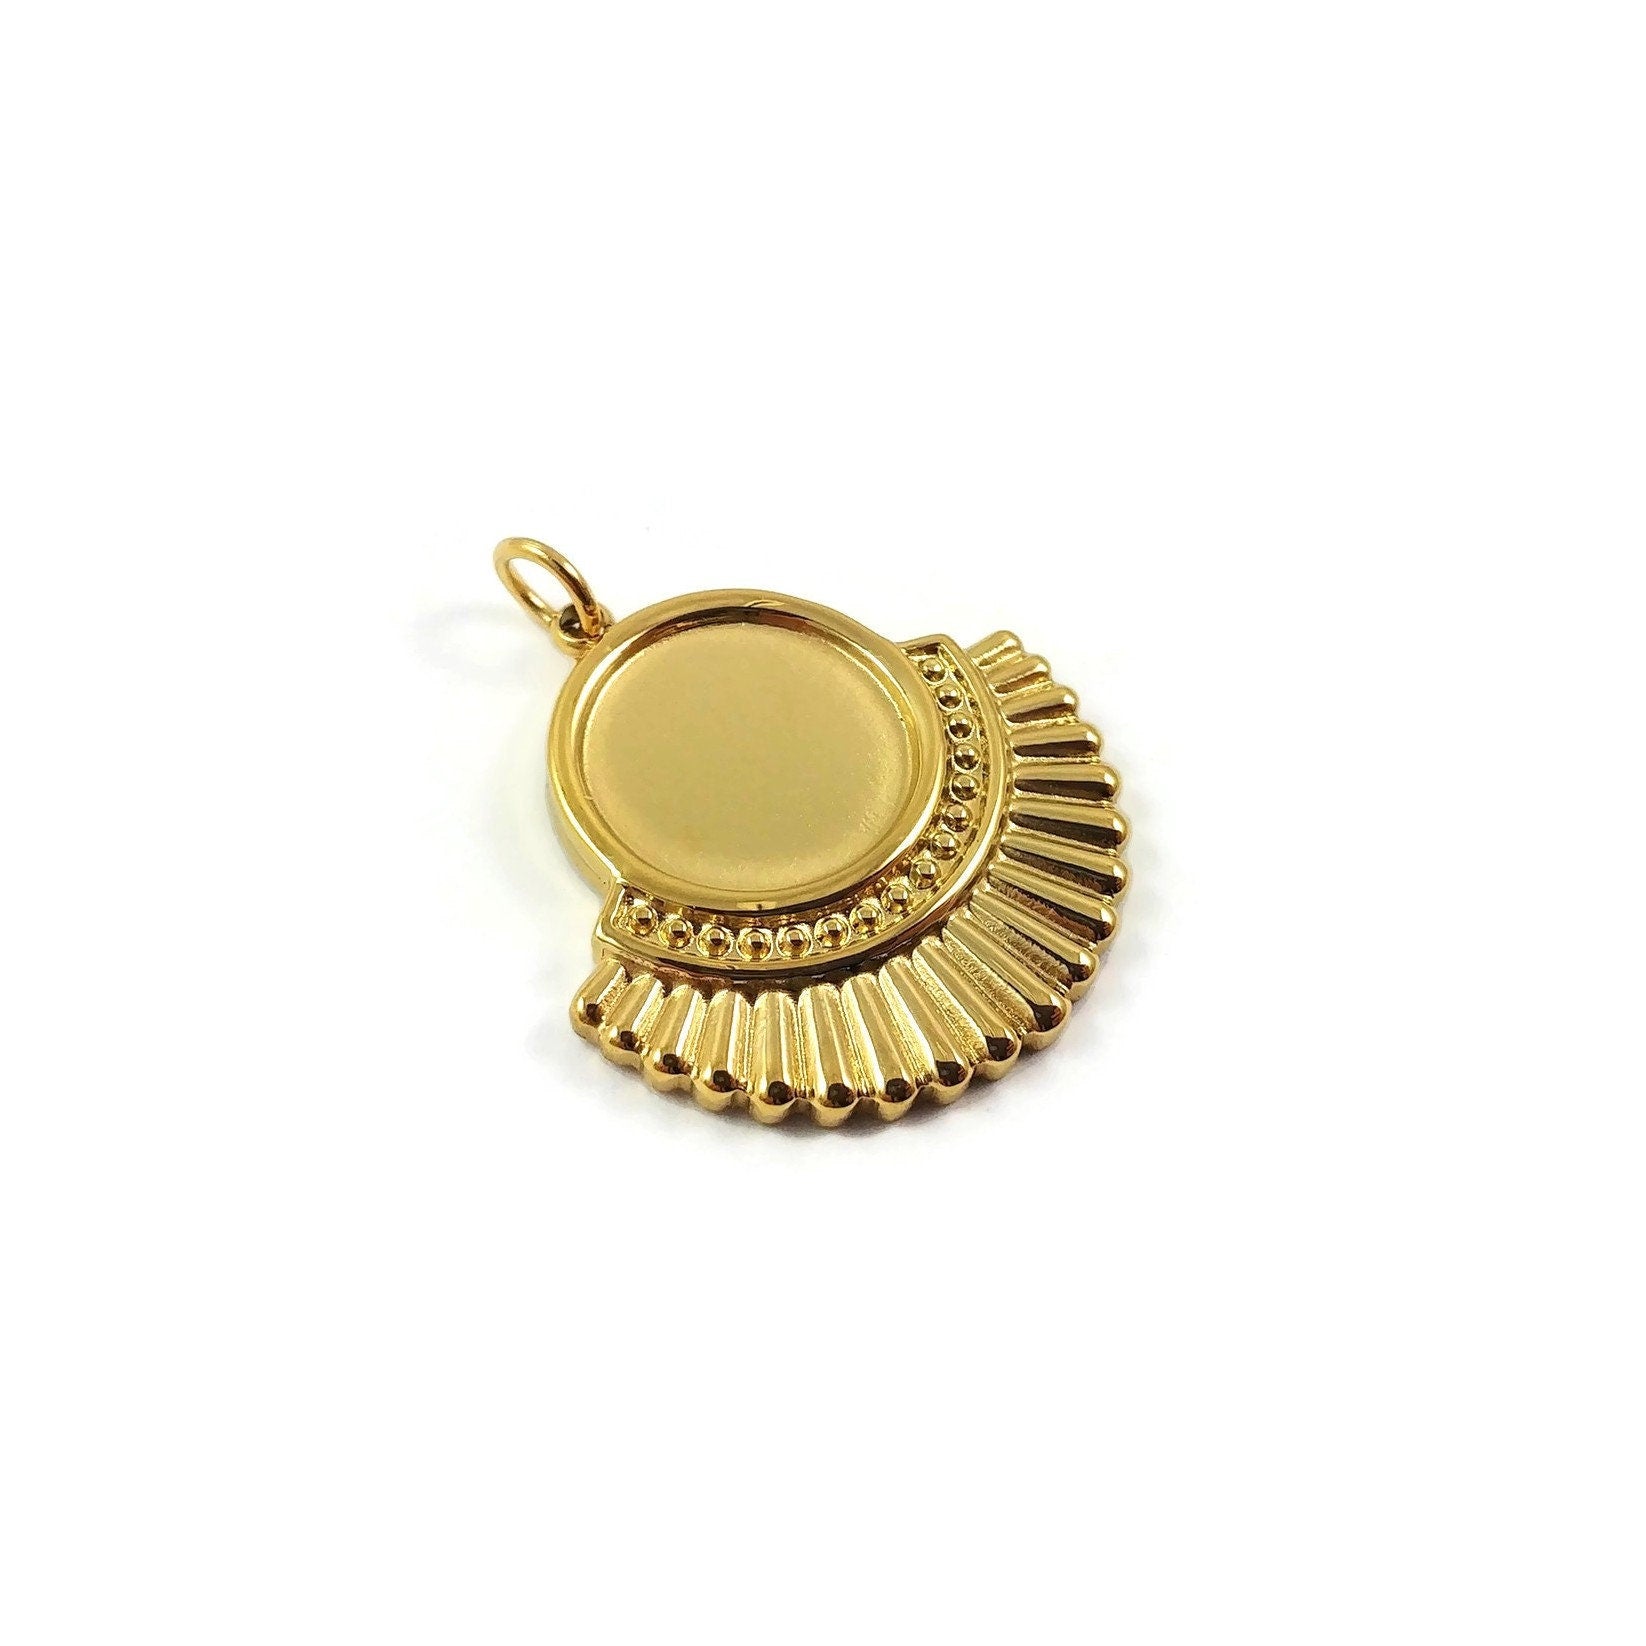 14K gold plated pendant, Stainless steel cabochon setting, Jewelry making supplies